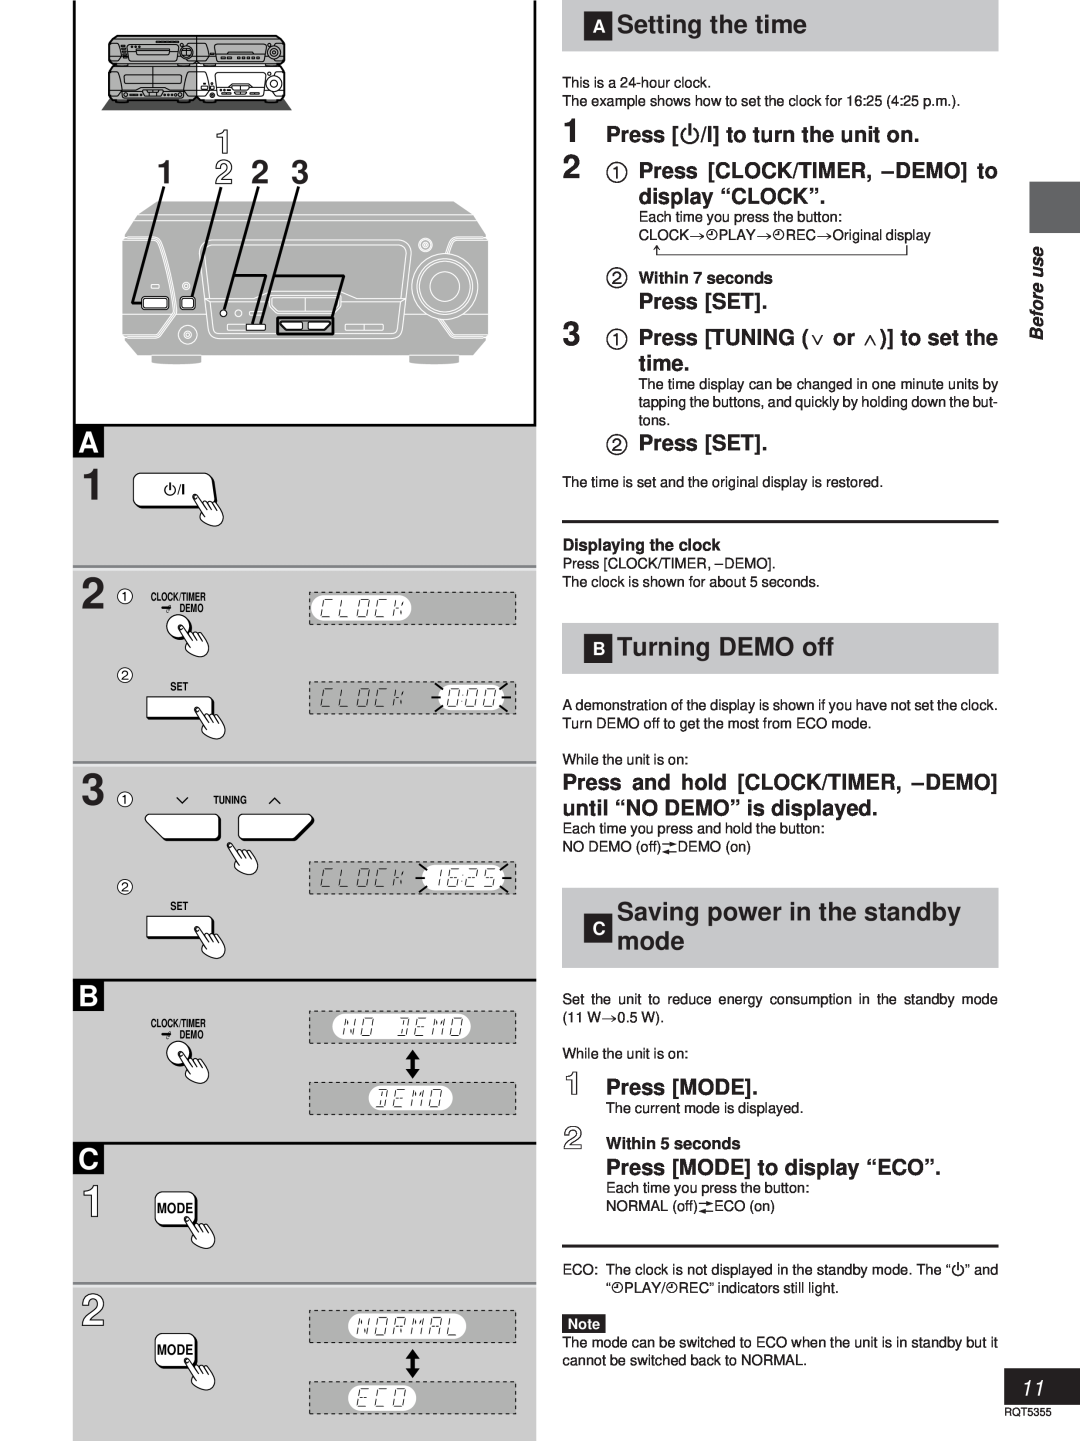 Technics SC-EH560 manual 1 H/I, »A Setting the time, »B Turning DEMO off, »Saving power in the standby C mode, Press SET 